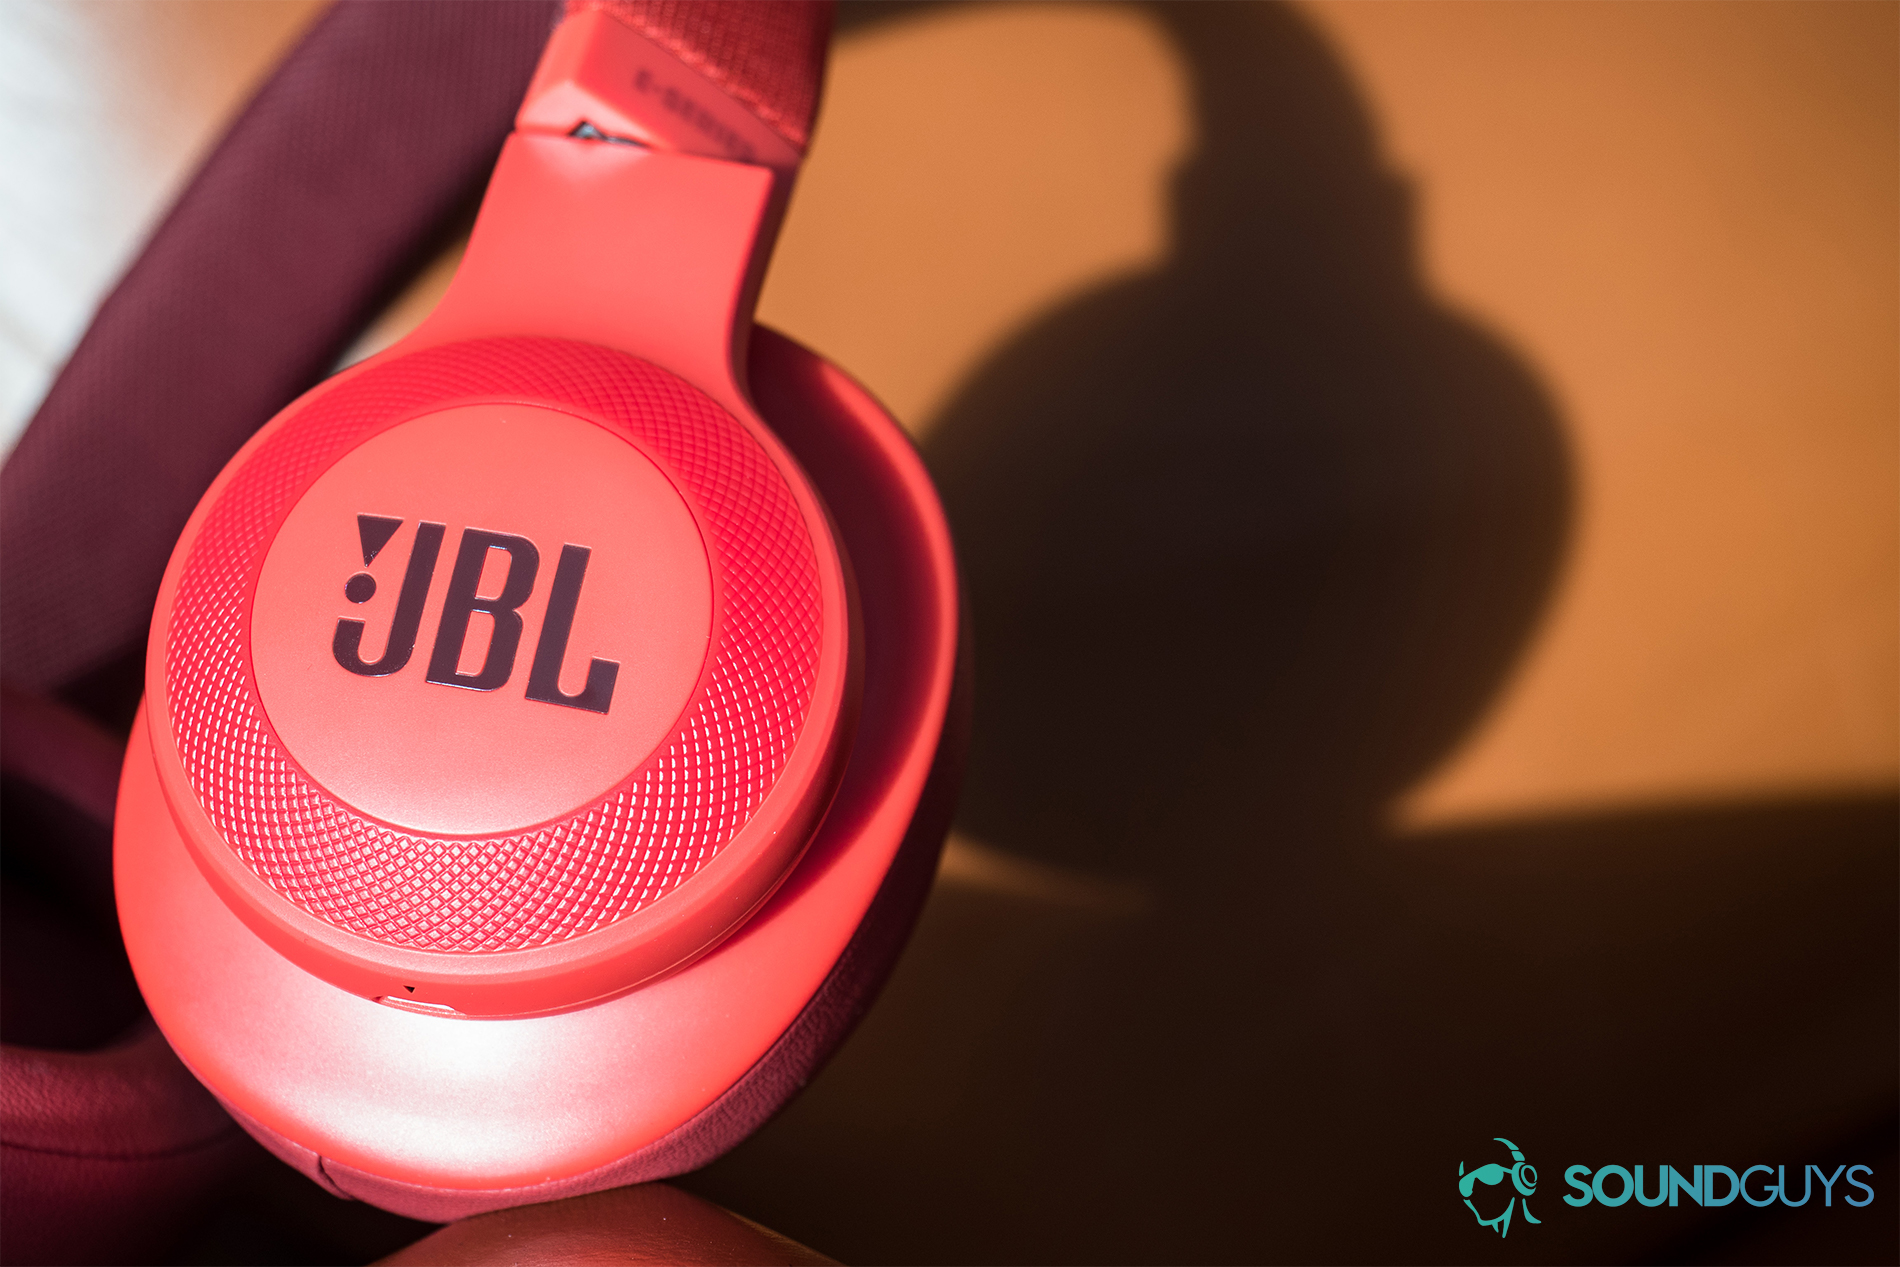 The plastic doesn't hinge reinforcement is an apparent weak point of the JBL E55BT headphones. The swiveling feature does make them more comfortable though.